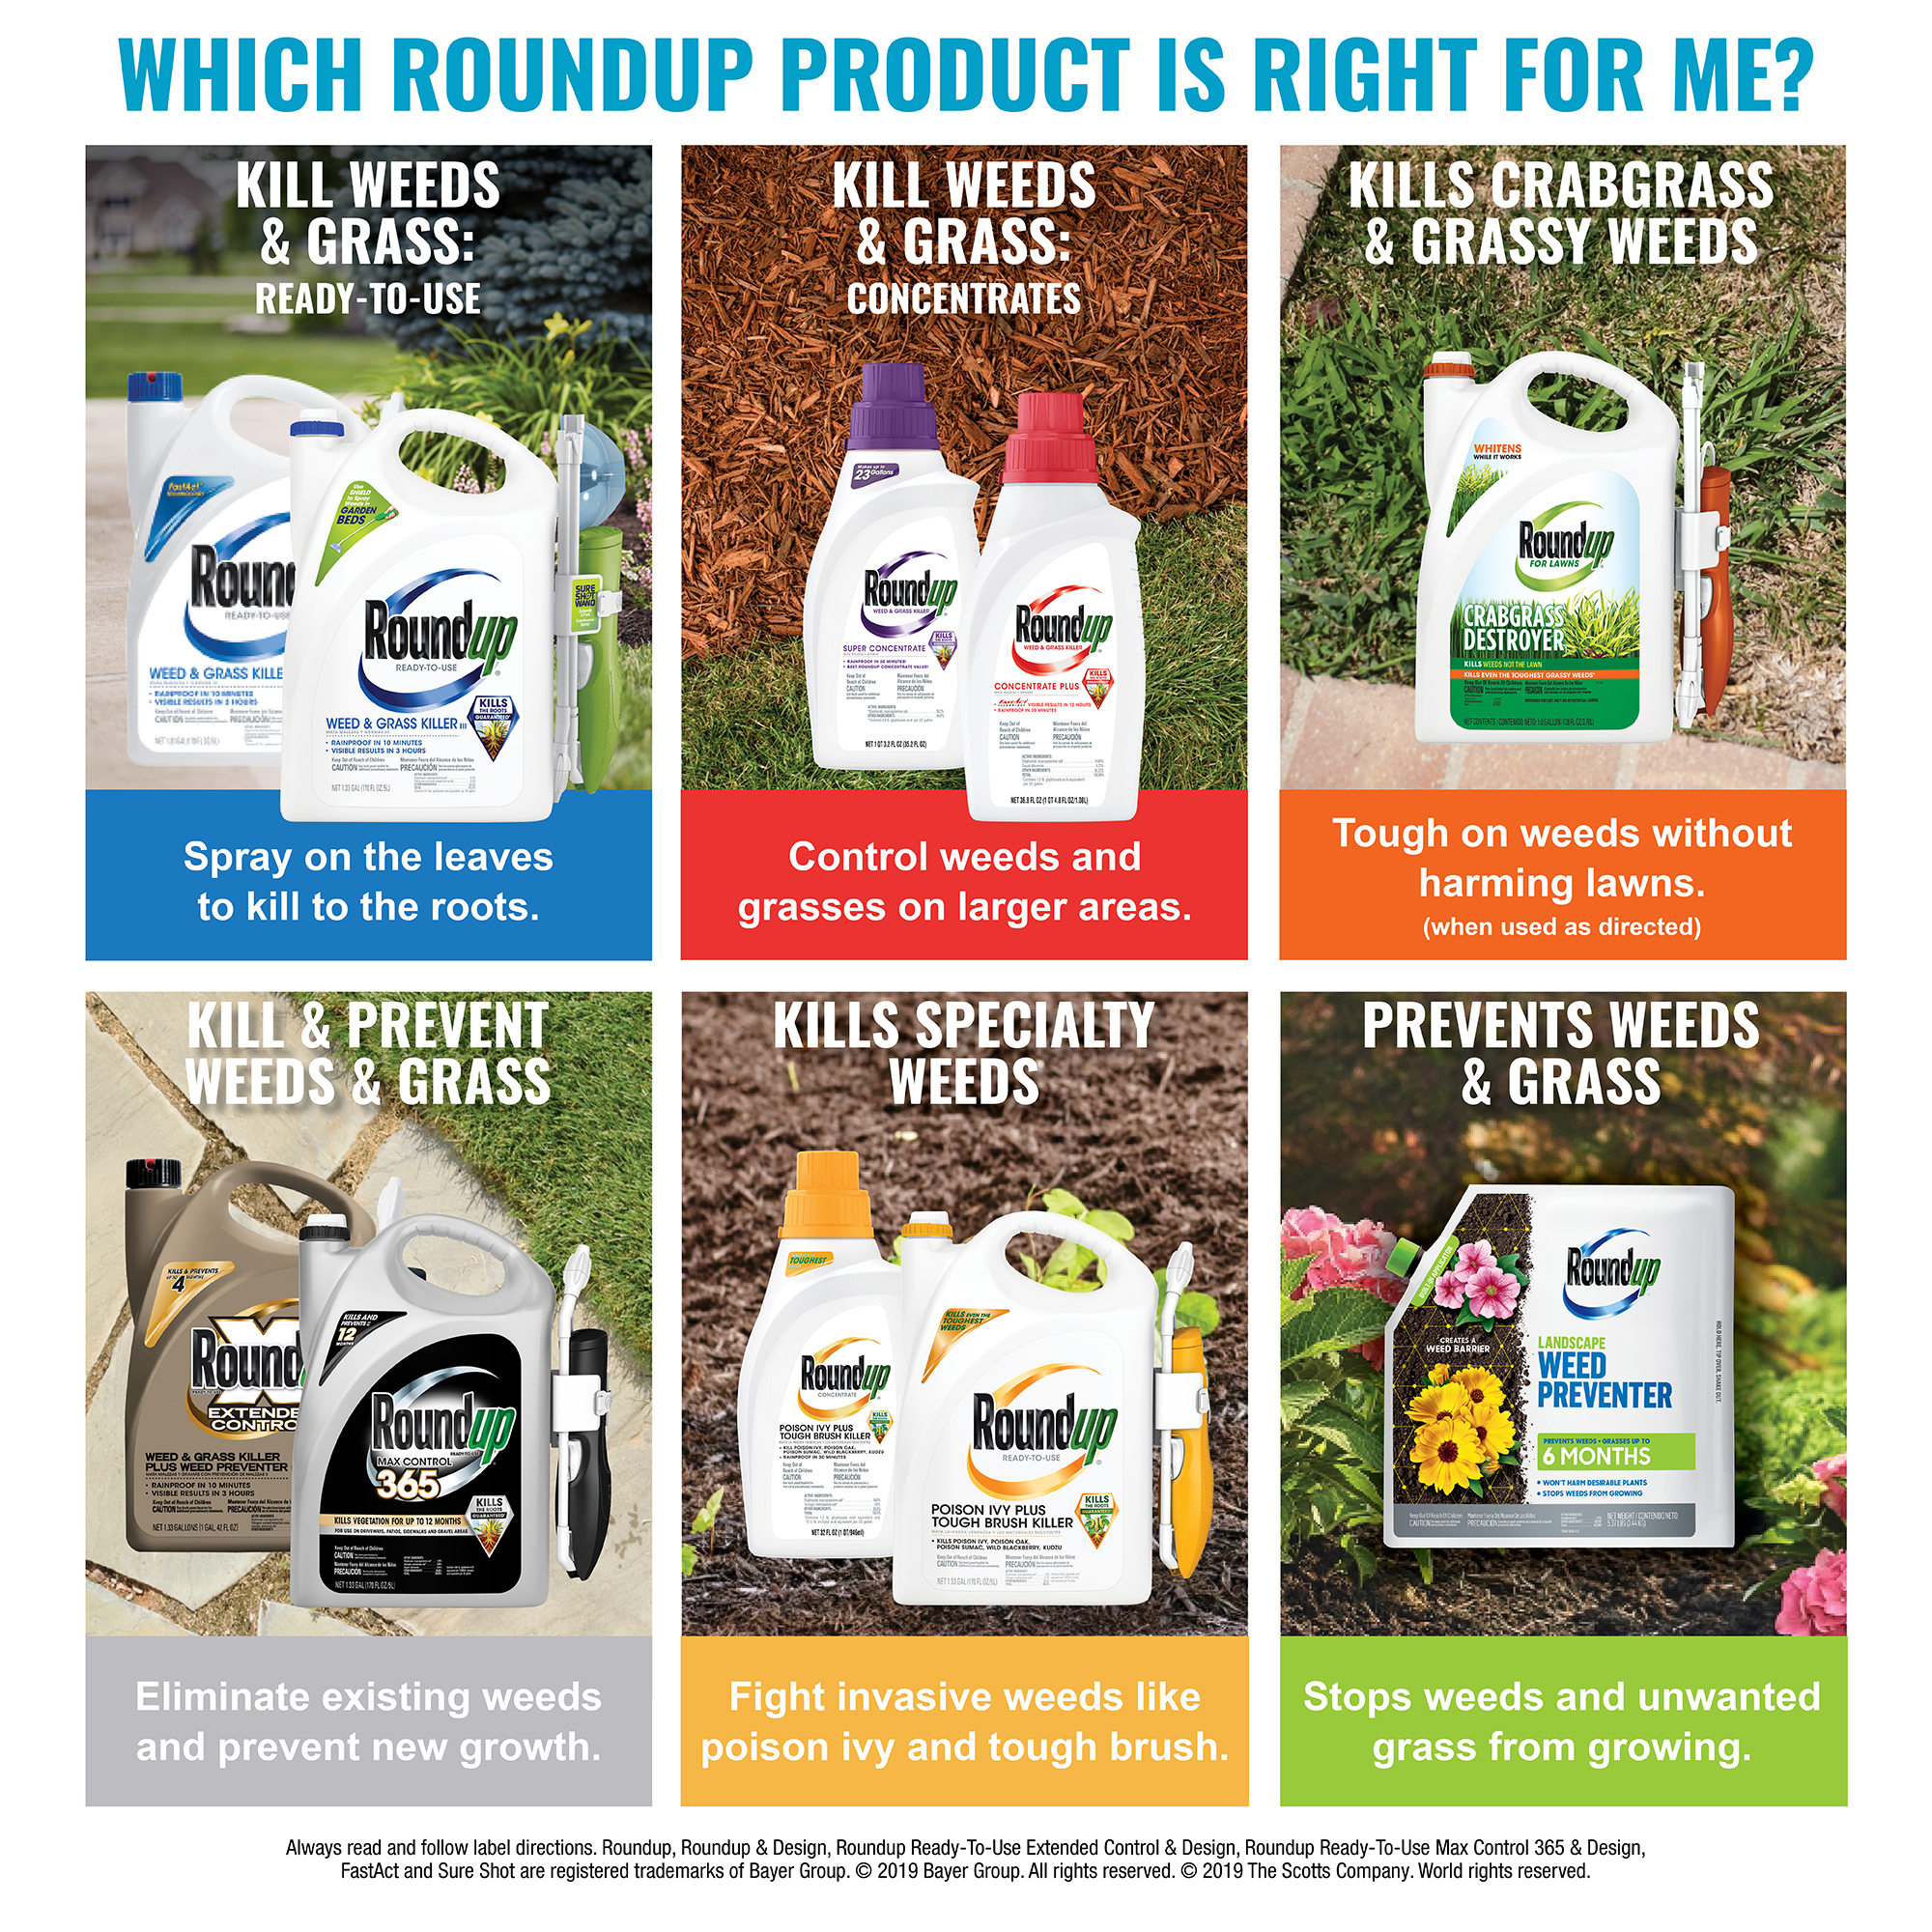 Roundup Weed and Grass Killer Concentrate 0.5 gal - image 3 of 4